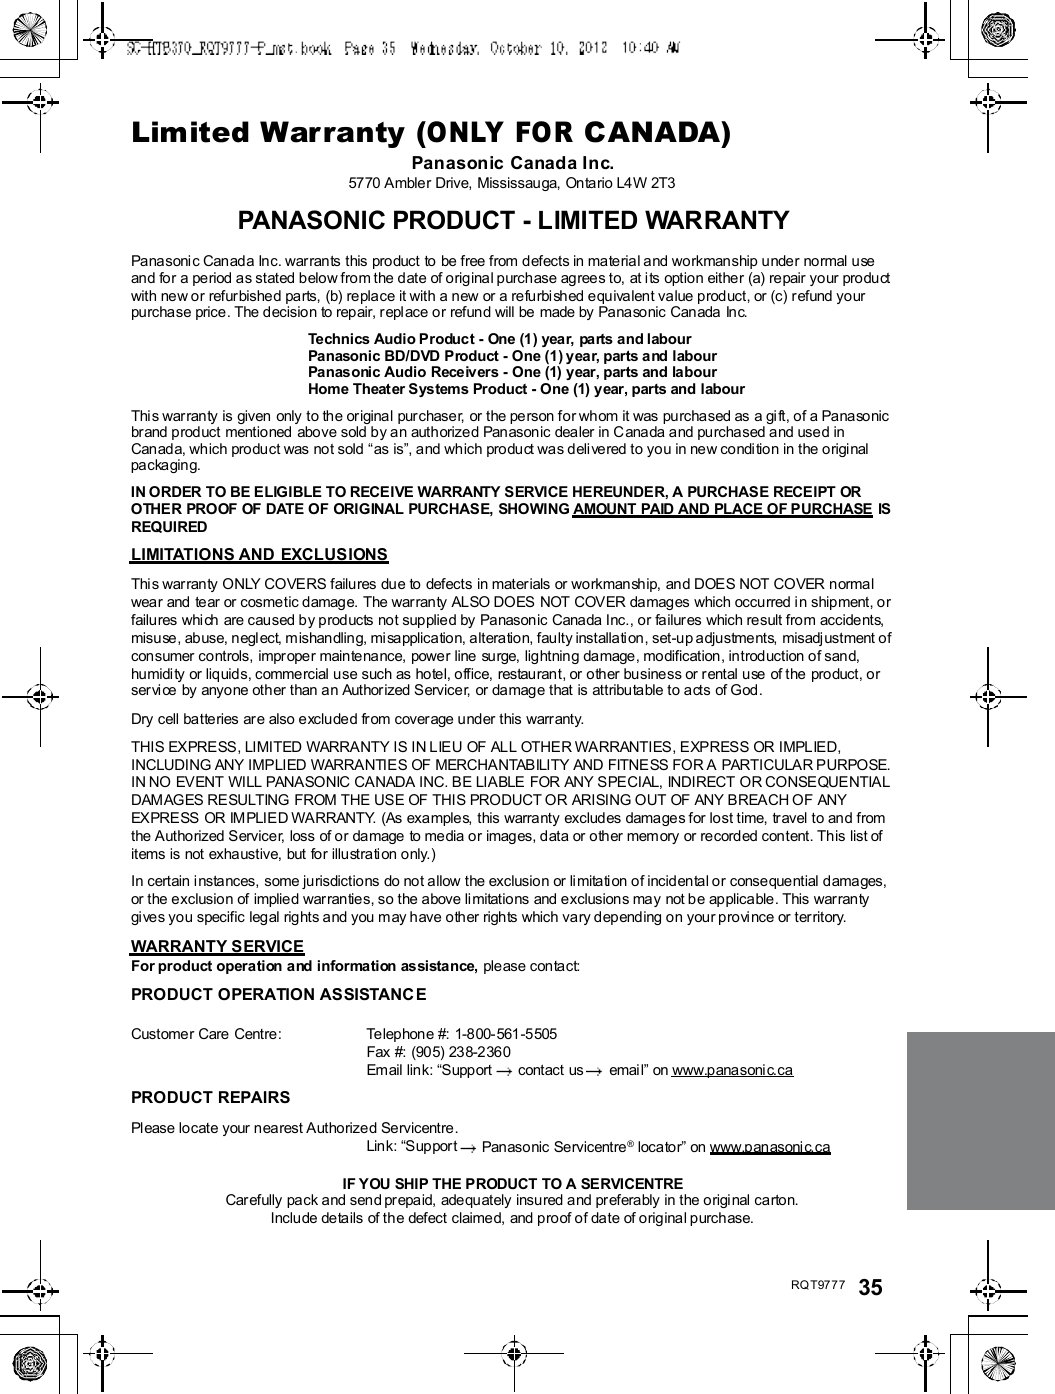 RQT9777 35Limited Warranty (ONLY FOR CANADA)Panasonic Canada Inc.5770 Ambler Drive, Mississauga, Ontario L4 W 2T3PANASONIC PRODUCT - LIMITED WARRANTYPana soni c Canad a Inc. war rants this pro duct  to  be free from defects in material a nd workmanship unde r normal useand for a period as stated below fro m the date of original purch ase agrees to,  at i ts option either (a) repair your produ ctwith new or refurbishe d parts, (b) replace it with a new or a re furbi shed equ ivalent value p roduct, or (c) r efund yourpurchase price. The decision to repair, r eplace o r refund will be made by Pana sonic Can ada  Inc.Technics Audio Product - One (1) year, parts and labourPanasonic BD/DVD Product - One (1) year, parts and labourPanasonic Audio Receivers - One (1) year, parts and labourHome Theat er S ys tems Product - One (1) year, parts and labourThis war ranty is given  only to the or igina l pur chaser, or the person for wh om it was purcha sed as a gi ft, of a Panasonicbr and prod uct  mentio ned  above sold by an authorized Panasonic dealer in C anada and pu rchased a nd use d inCan ad a, which pro du ct was no t sold as is, and which pro du ct was delive red to yo u in new condi tion in the origi nalpackaging.IN ORDER TO BE ELIGIBLE TO RECEIVE WARRANTY SERVICE HEREUNDER, A PURCHASE RECEIPT OROTHER PROOF OF DATE OF ORIGINAL PURCHASE, SHOWING AMOUNT PAID AND PLACE OF PURCHASE ISREQUIREDLIMITATIONS AND EXCLUSIONSThis war ranty ONLY COVERS failures du e to defects in mater ials or workmansh ip, and DOES NOT COVER normalwea r and  te ar or cosmetic damage. The warran ty ALSO DOES NOT COVER damages which occu rred i n shipment, orfailures whi ch are caused b y products not supplied by Panasonic Canada I nc., or failur es which result from accidents,misuse, abuse, negl ect, m ishandling, mi sapplicatio n, alteration, faulty installati on, set-u p adjustments,  misadj ustment ofconsumer controls, impr ope r maintenance, power line  surge, lightning damage , modification, introd uction of sand,humidi ty or liquids, commercial use such as hotel, office,  restauran t, or other busine ss or rental u se  of the  product, orservice by anyone other than a n Authorized Servicer, or damag e that is attributable to acts of God.Dry cell batteries ar e also excluded fr om coverage u nder this warr anty.THIS EXPRESS, LIMITED WARRANTY IS IN LIEU OF ALL OTHER WARRANTIES, EXPRESS OR IMPLIED,INCLUDING ANY IMPLIED WARRANTIES OF MERCHANTABILITY AND FITNESS FOR A PARTICULAR PURPOSE.IN NO EVENT WILL PANASONIC CANADA INC. BE LIABLE FOR ANY SPECIAL, INDIRECT OR CONSEQUENTIALDAMAGES RESULTING FROM THE USE OF THIS PRODUCT OR ARISING OUT OF ANY BREACH OF ANYEXPRESS OR IMPLIED WARRANTY. (As examples, this warranty excludes damages for lost time, travel to and fromthe Authorized Servicer, loss of or damage to media or images, data or other mem ory or re corded content. This list ofitems is not exhaustive, but for illustration only.)In certain i nstances, some jurisdictions do not a llow the exclusion or li mitati on of incidental or conseque ntial damages,or the exclusio n of implied war rantie s, so the a bove li mitations and exclusions ma y not b e applicable . This warran tygi ves you specific legal rights a nd you m ay h ave other rights which vary d ep end ing on your provi nce or ter ritory.WARRANTY SERVICEFor product operation and information assistance, please contact:PRODUCT OPERATION ASSISTANCECustomer Care  Centre : Telephone #: 1-8 00- 561-5505Fax #: (90 5) 238-2360Email link: Supp ort  contact us  emai l on www.p anasoni c.caPRODUCT REPAIRSPl ease lo cate your n ea rest Authorized Servicentre .Lin k: Sup por t  Panaso nic Servicentre ® locator on www.panasoni c.caIF YOU SHIP THE PRODUCT TO A SERVICENTRECar efully pa ck and sen d pr epa id, adequately insured and pr efera bly in the origi nal carton.Inclu de details of th e defect  claime d,  and p roof o f date of o rigina l purchase.